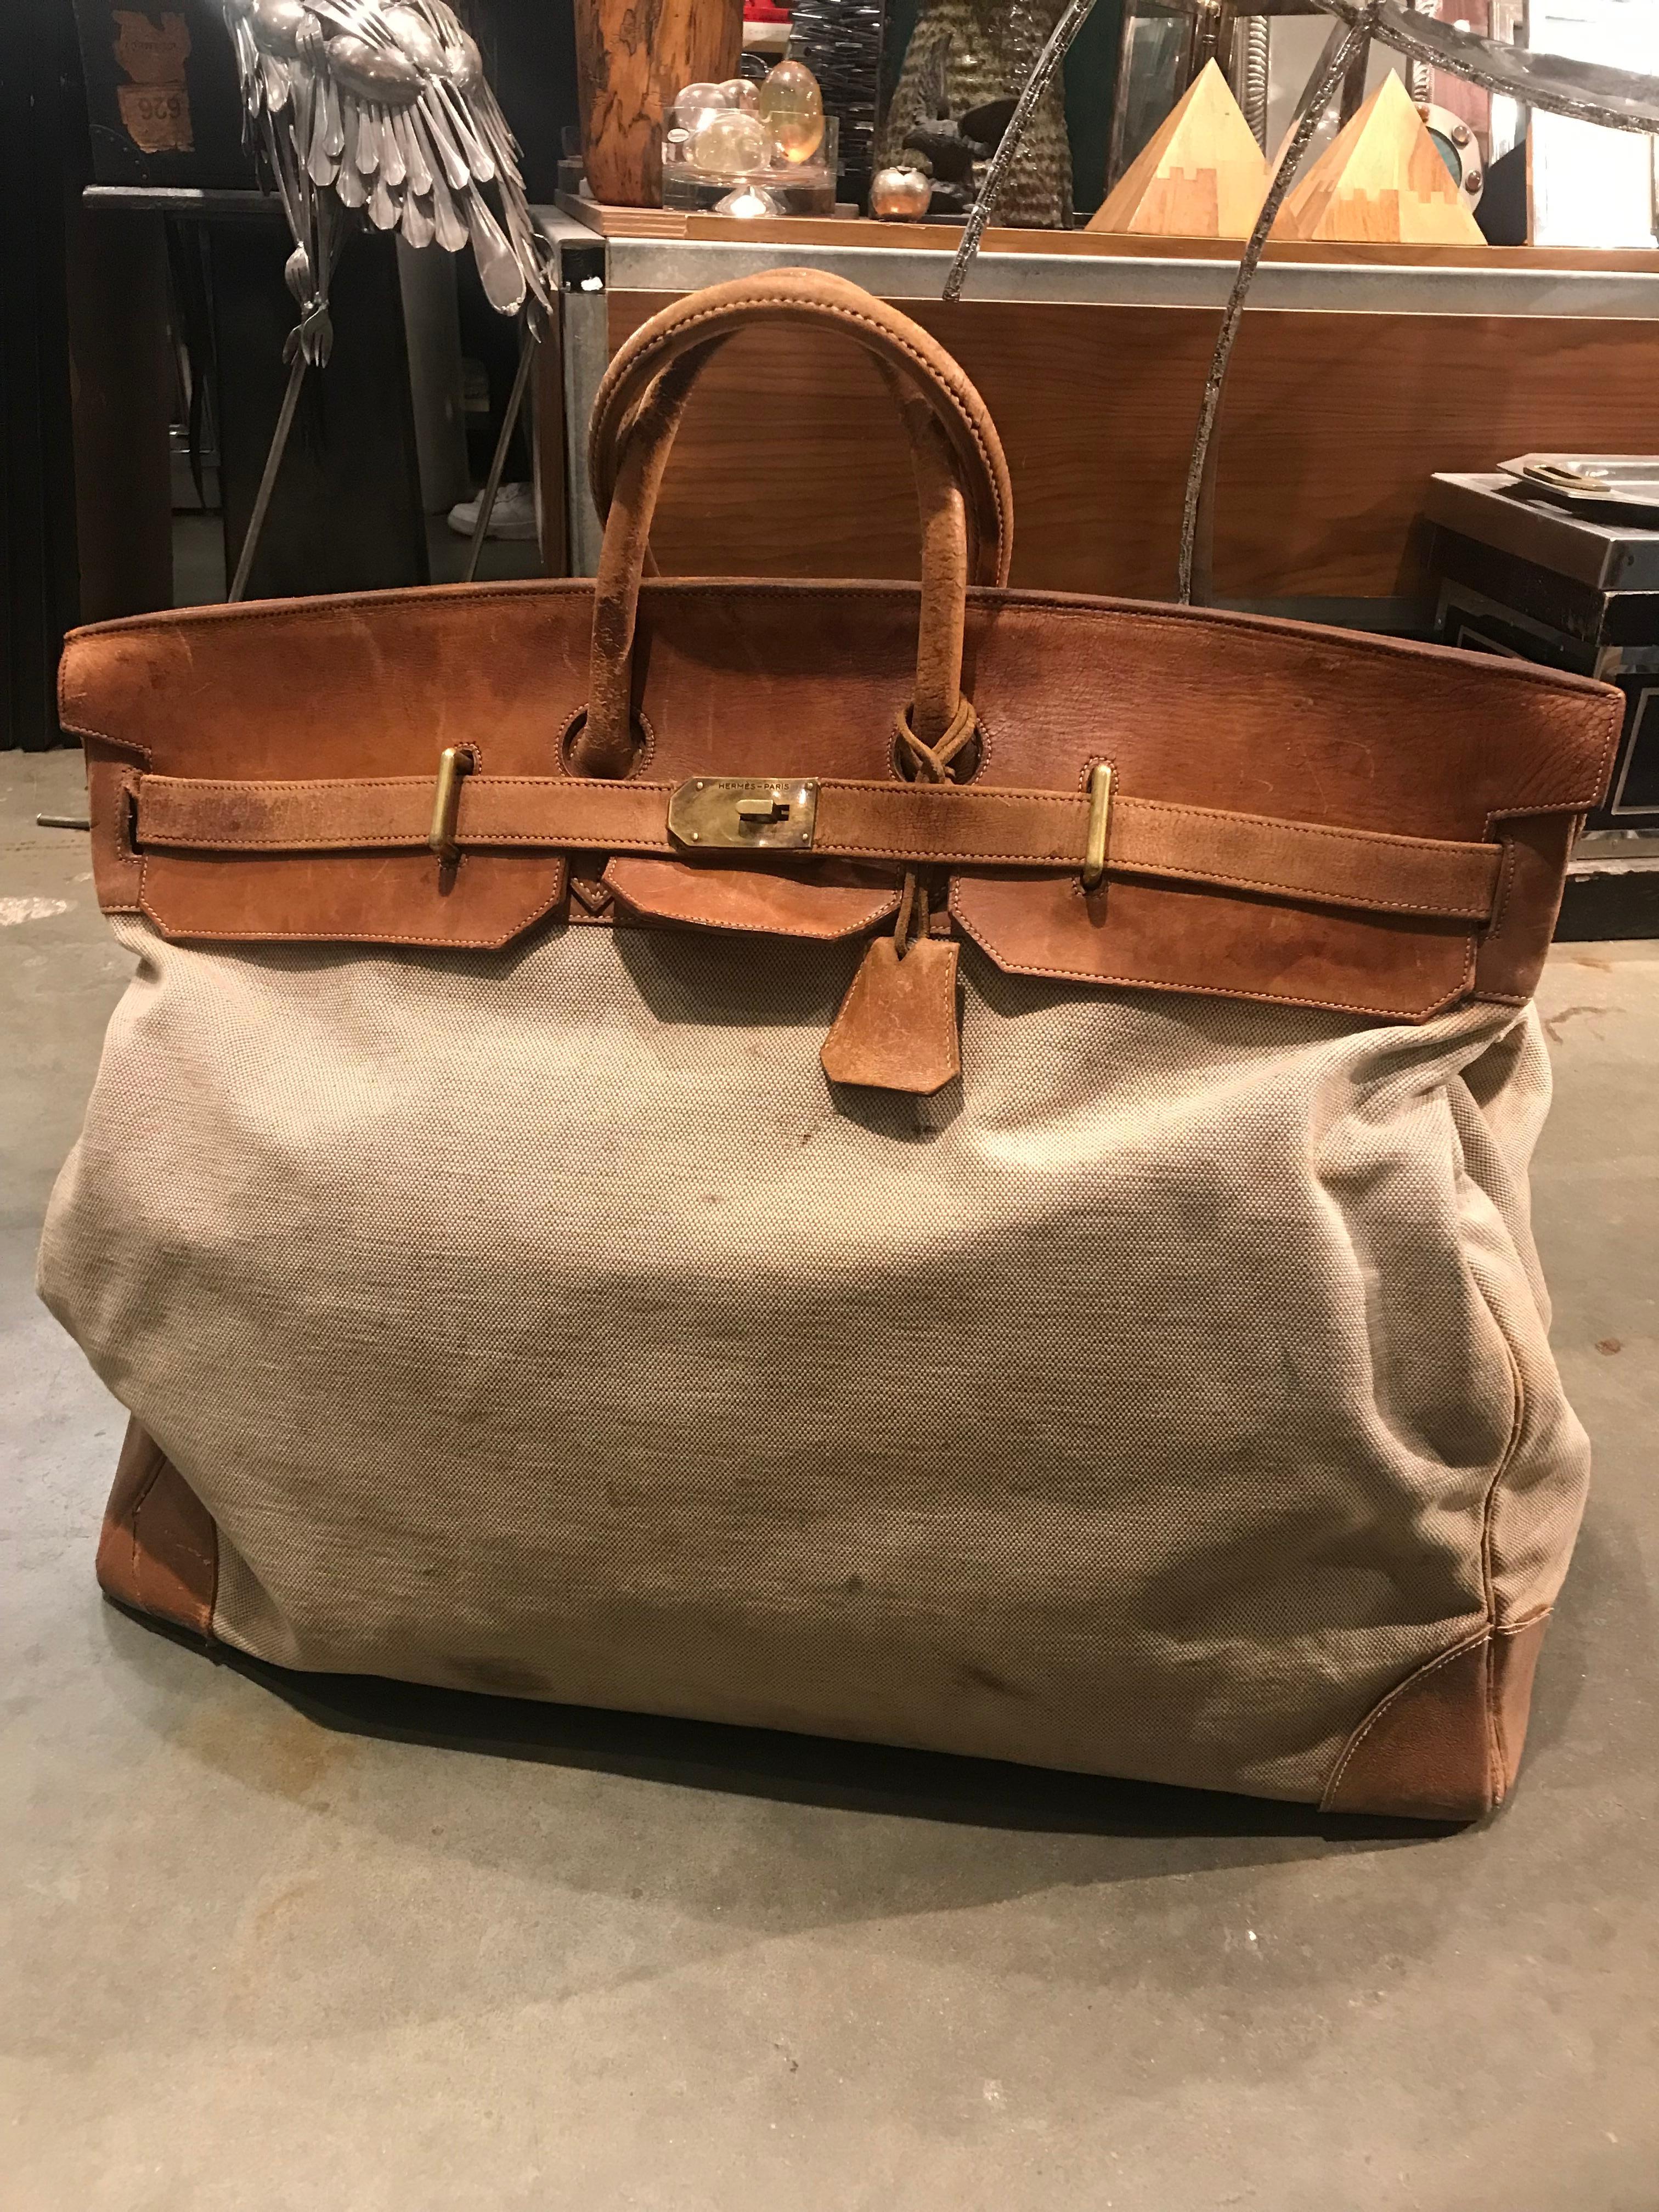 An incredible example of the largest Hermes travel bag ever made. Worn to perfection with a few blemishes, but remaining solid in it's structure and the integrity of the bag. Measures: 60cm,

circa 1960s.